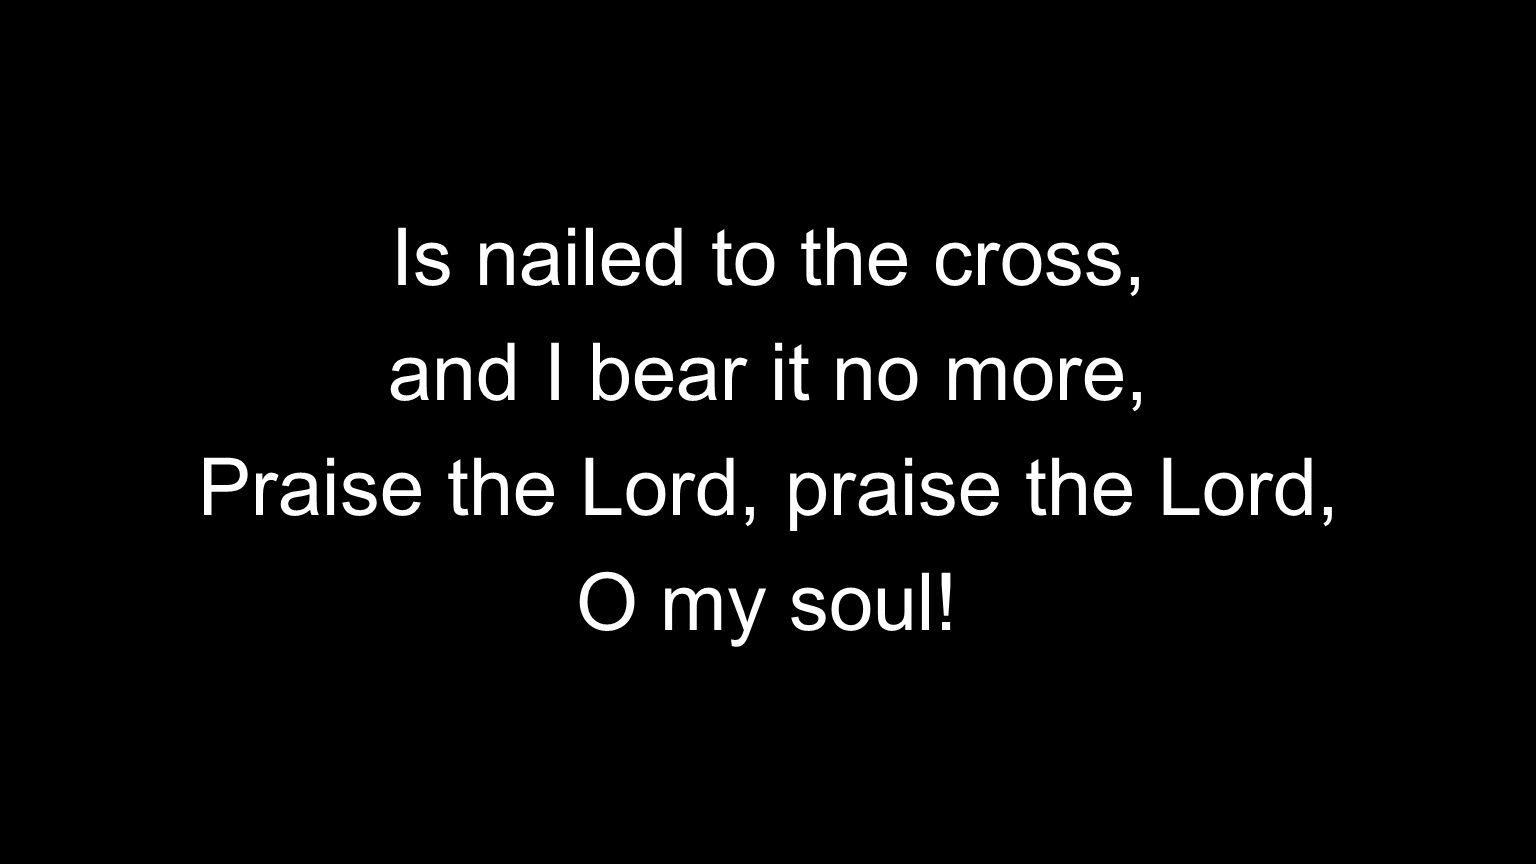 Is nailed to the cross, and I bear it no more, Praise the Lord, praise the Lord, O my soul!